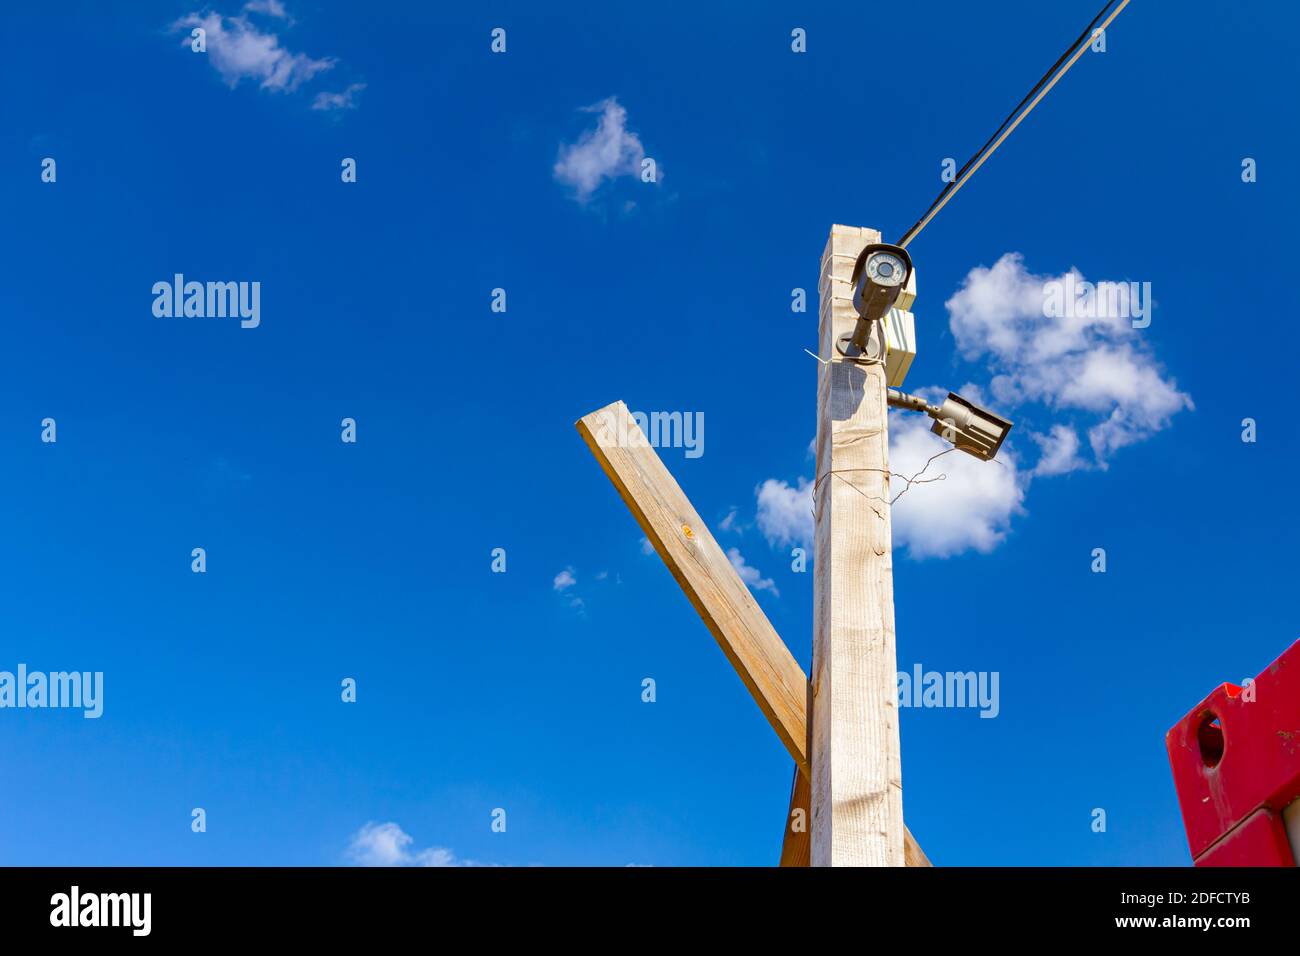 Security cameras are placed on the wooden pole for protection. Stock Photo